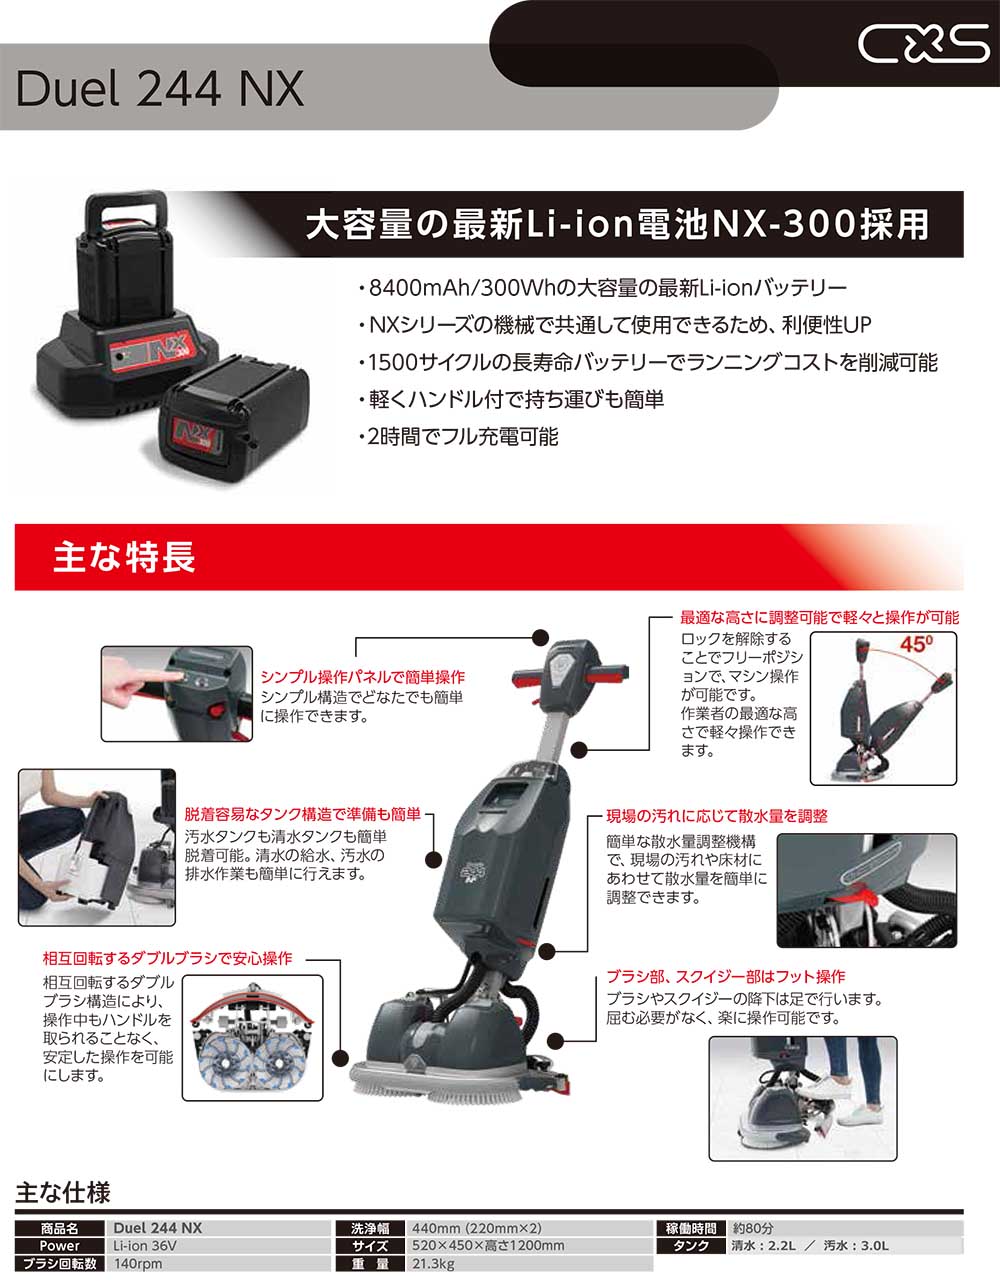 https://www.polisher.jp/data/polisher/product/0001/c_by_s/Duel_244NX/explanation_04.jpg